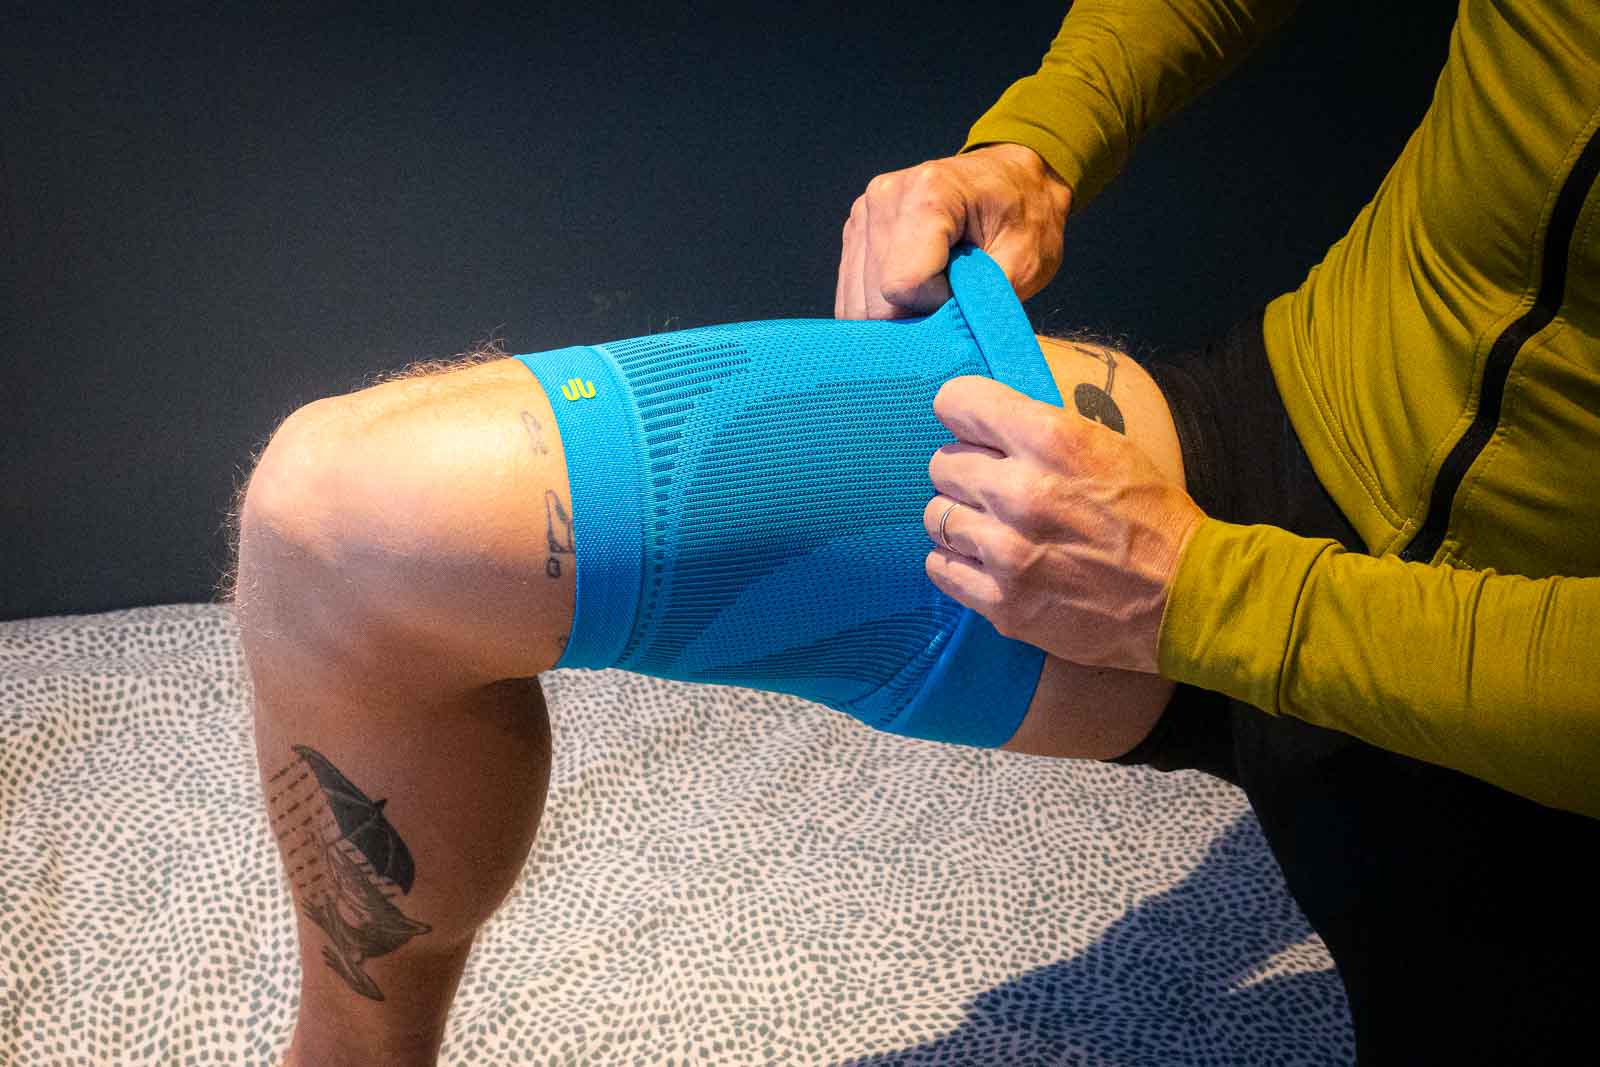 A cyclist wearing cycling clothing pulls a blue thigh compression sleeve over his thigh